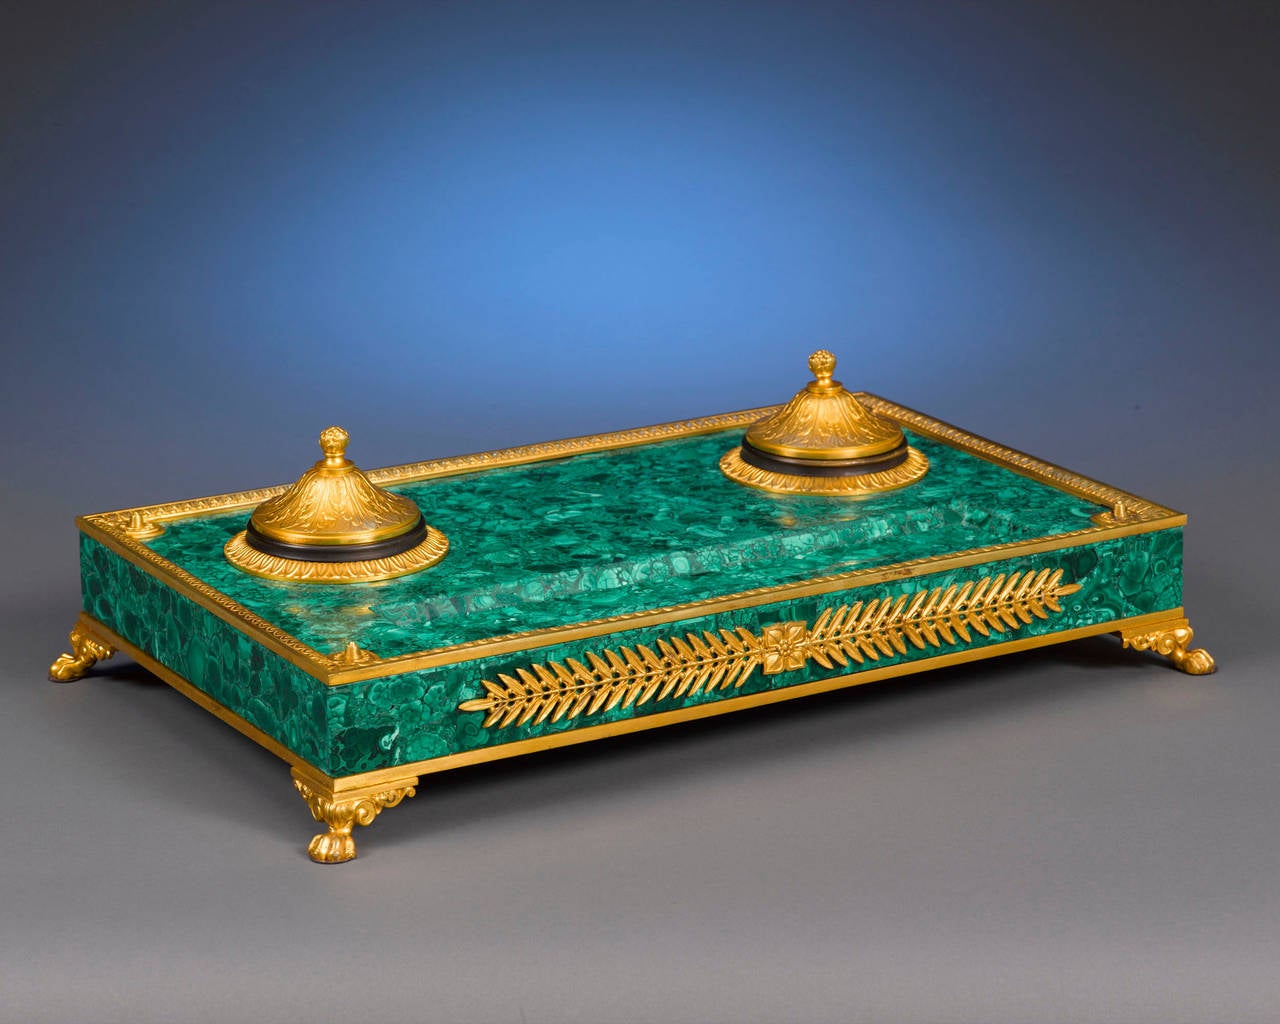 Malachite is one of Russia’s most prestigious stones, and its use in the creation of this rare and opulent inkwell indicates commission and ownership by an individual of considerable status. Wonderful doré bronze accents are the perfect complement